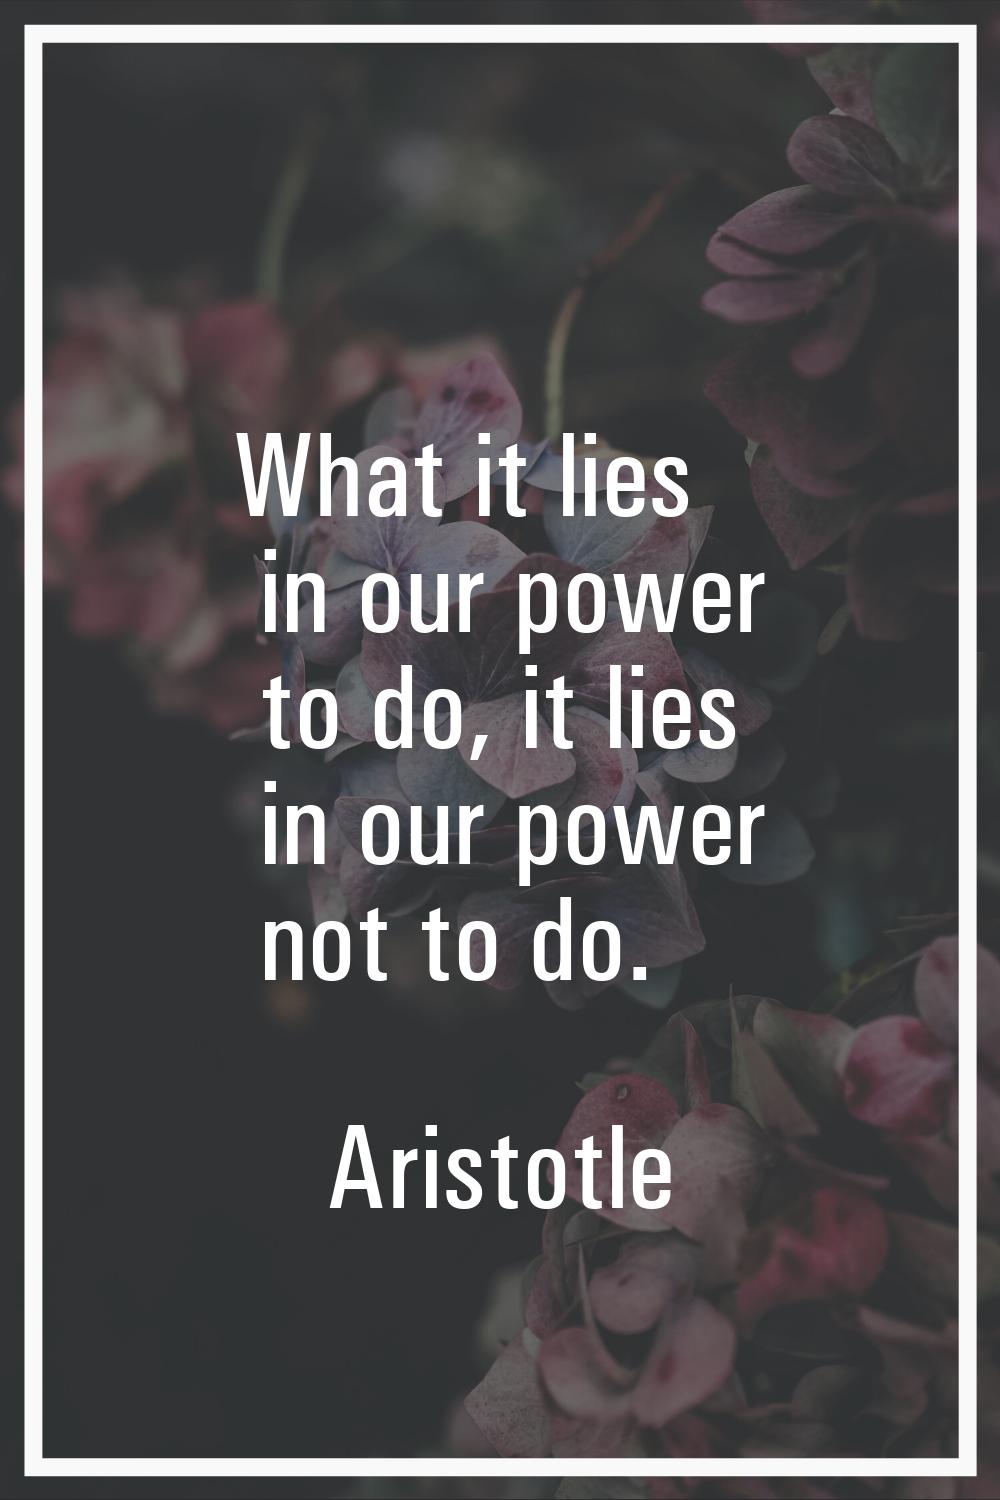 What it lies in our power to do, it lies in our power not to do.